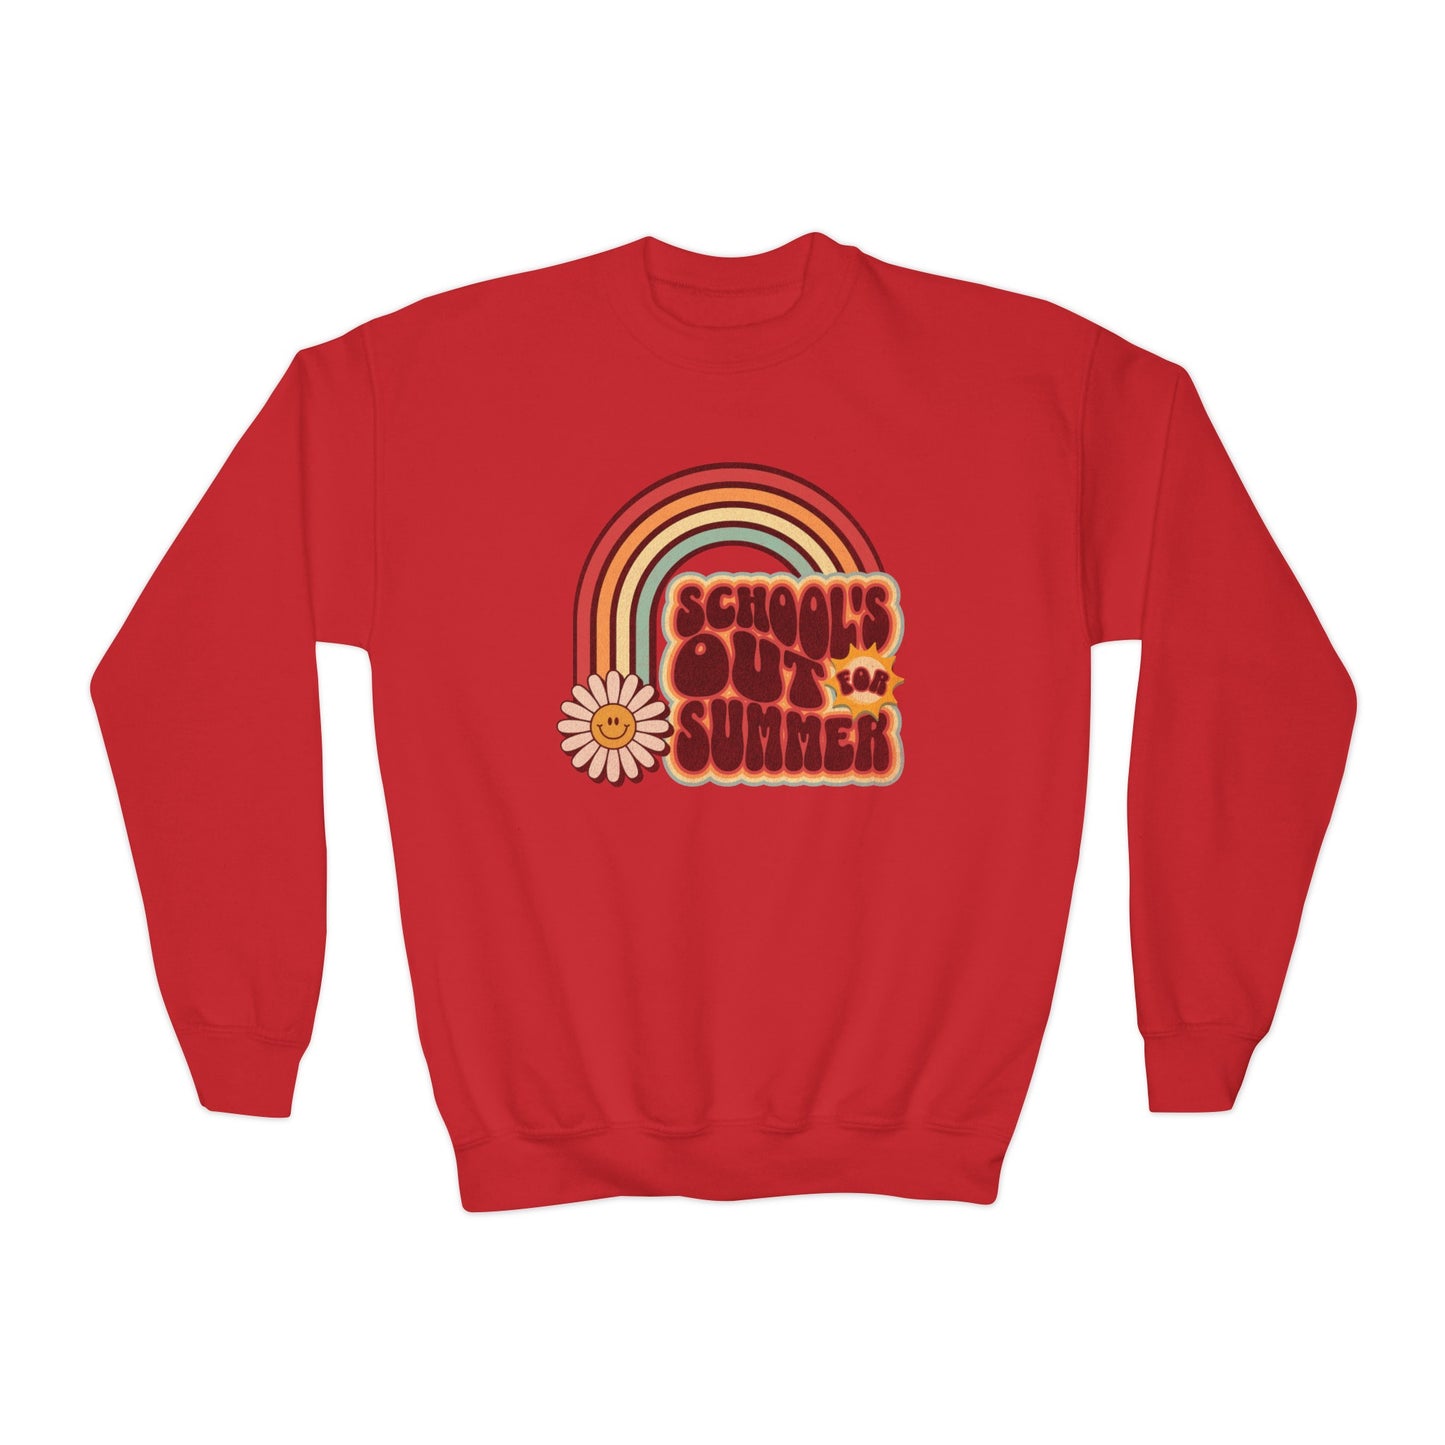 School's out for Summer - Youth Crewneck Sweatshirt